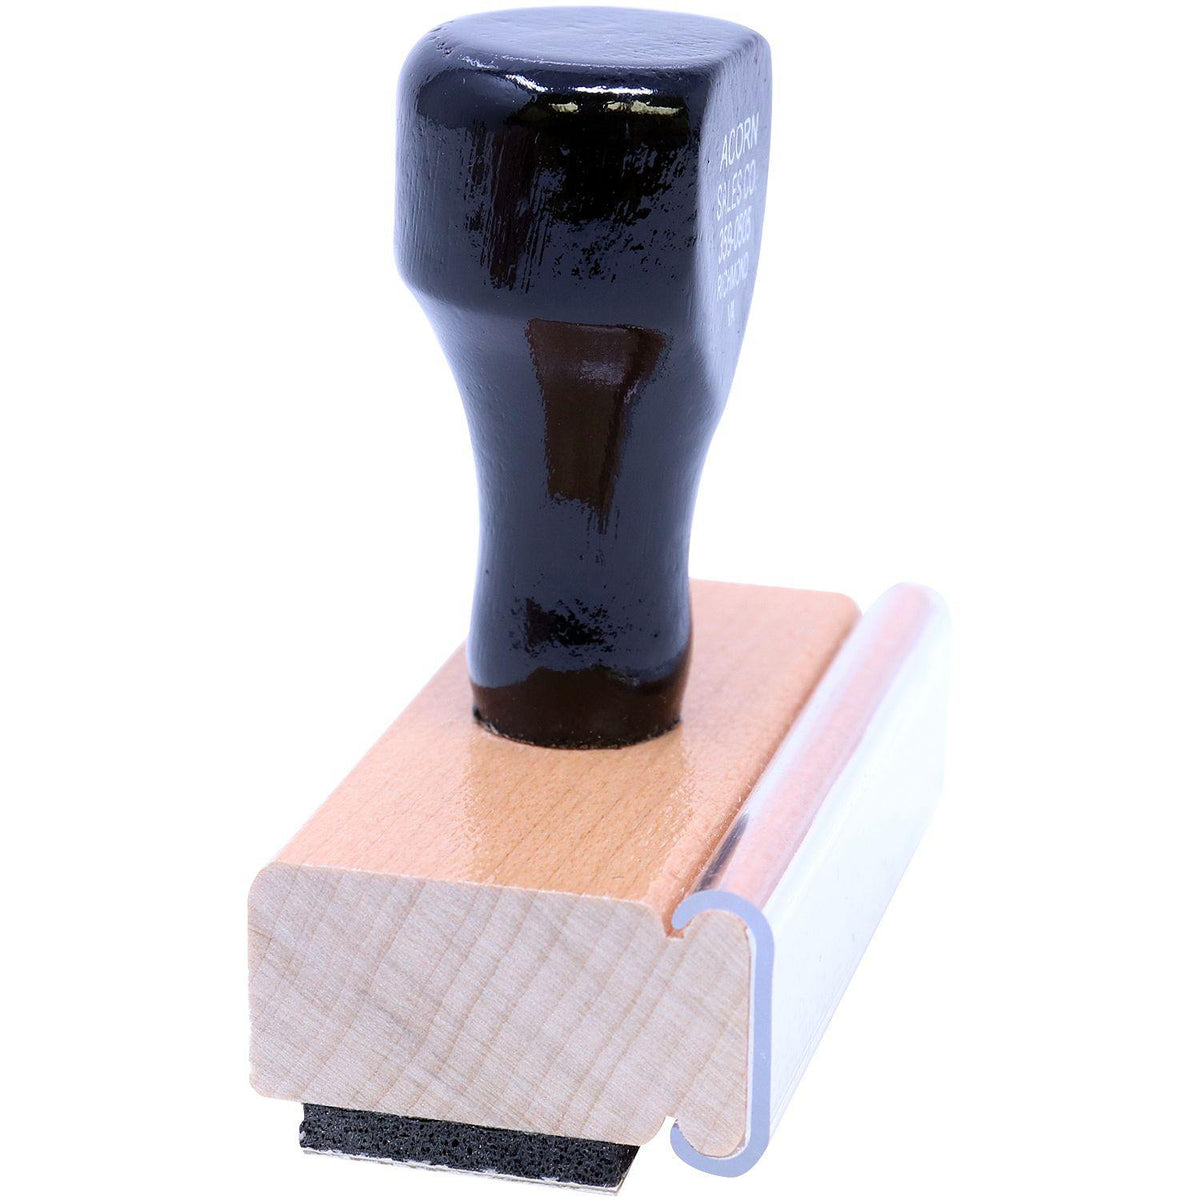 Large Will Rubber Stamp - Engineer Seal Stamps - Brand_Acorn, Impression Size_Large, Stamp Type_Regular Stamp, Type of Use_Legal, Type of Use_Medical Office